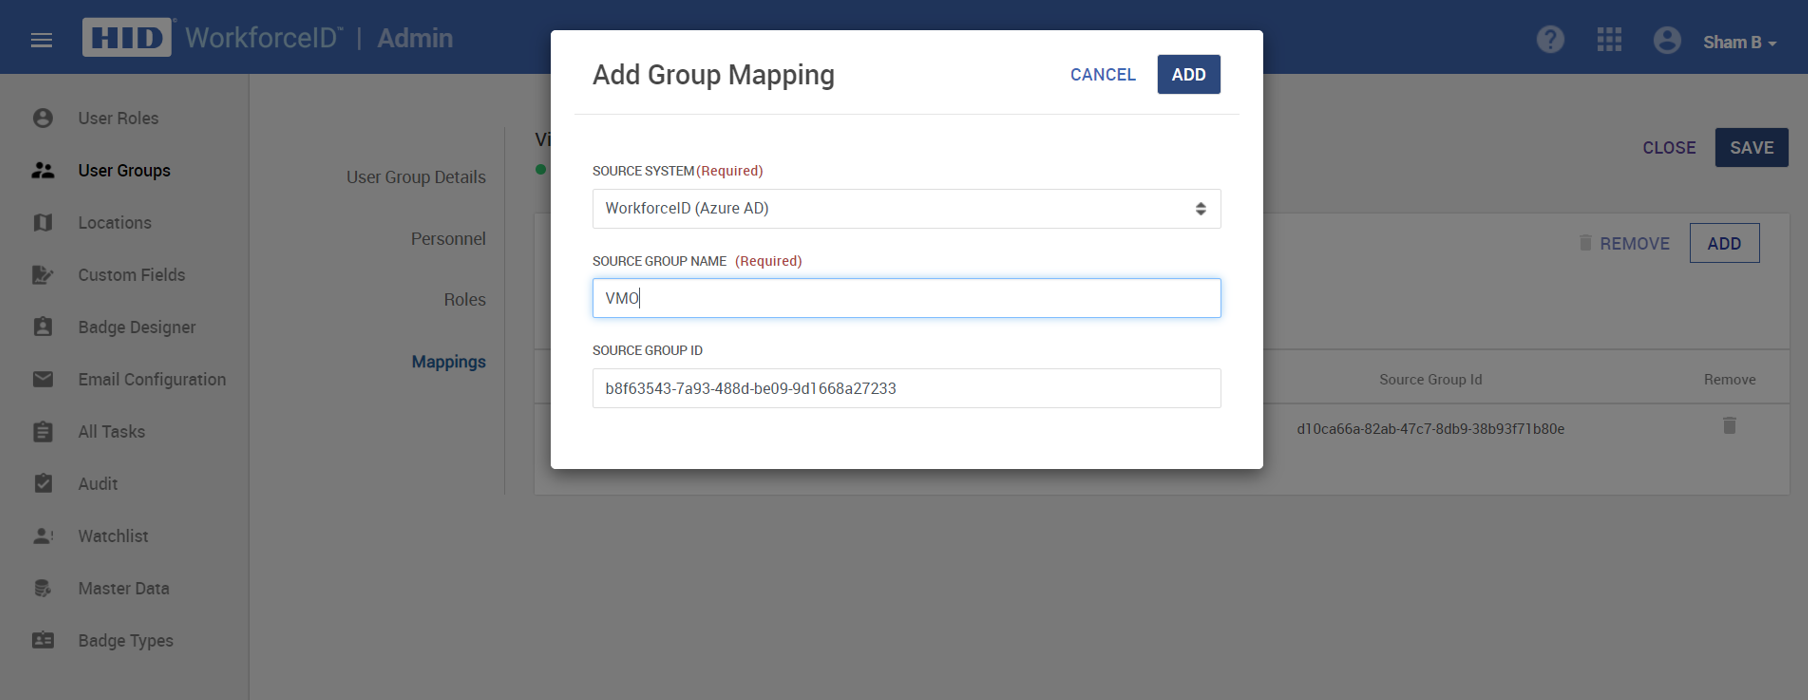 Configuring SSO and user group mapping for default WorkforceID user source